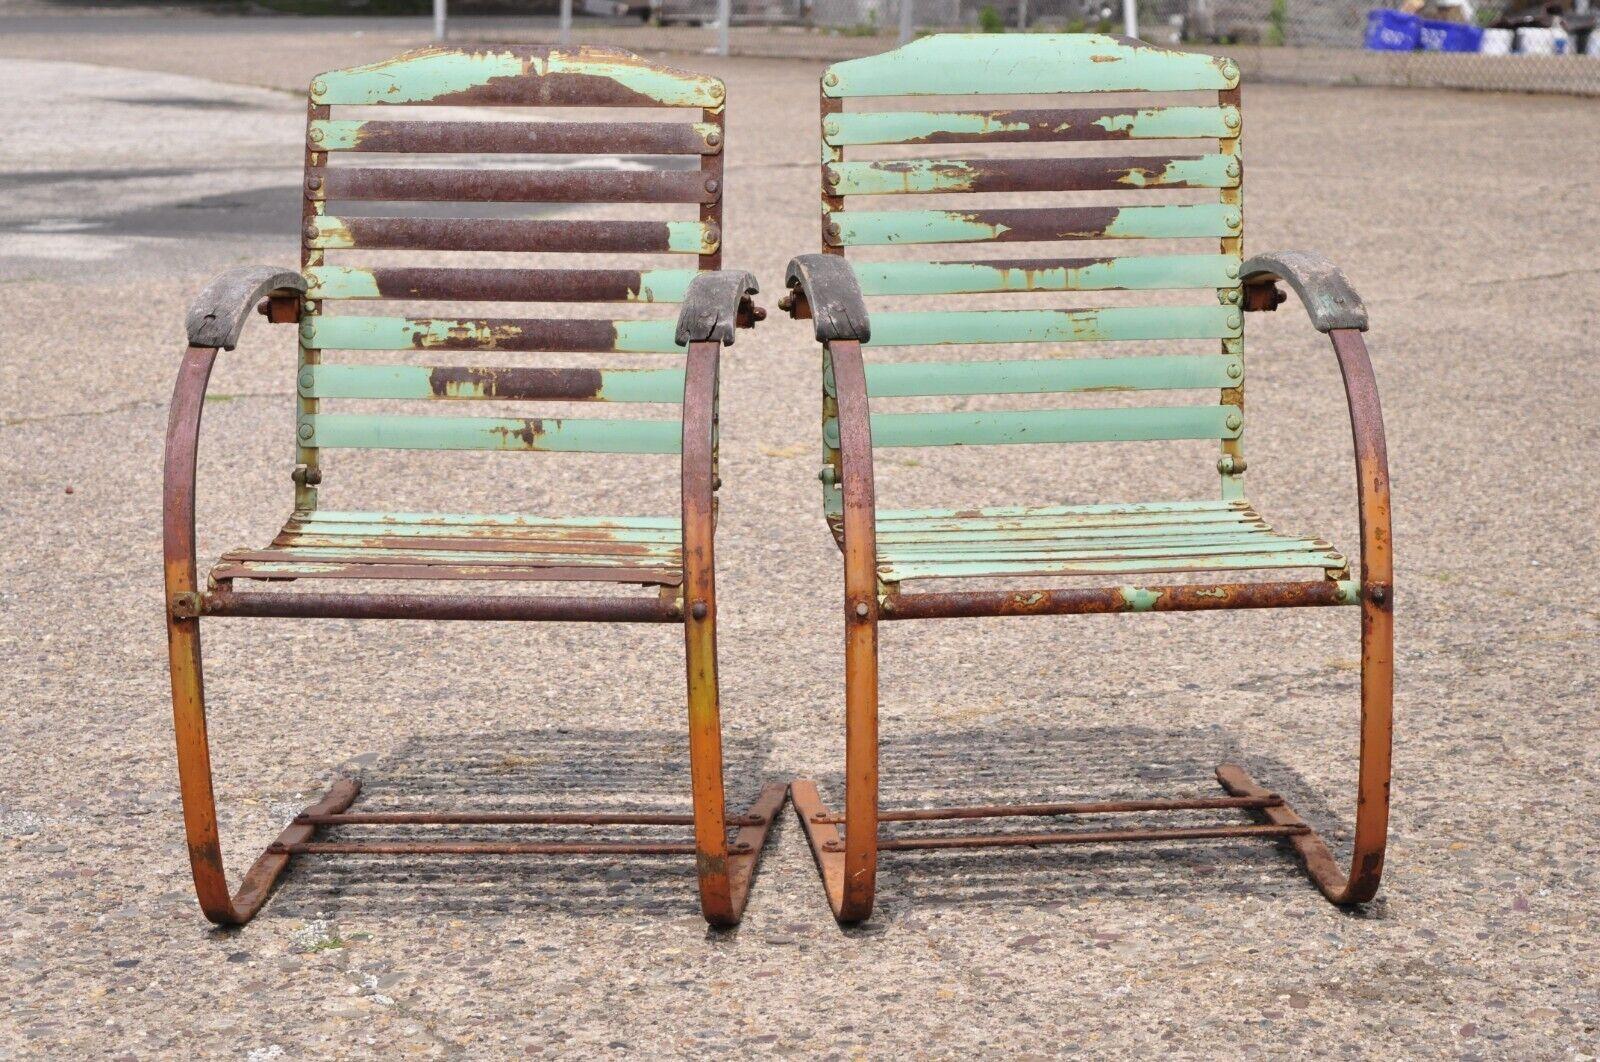 Antique Art Deco green distress painted steel metal outdoor lounge chairs - a pair. item features iron/steel metal bouncer frames, iron slats, wooden armrests, distressed green painted weathered finish, very nice antique pair, great style and form.